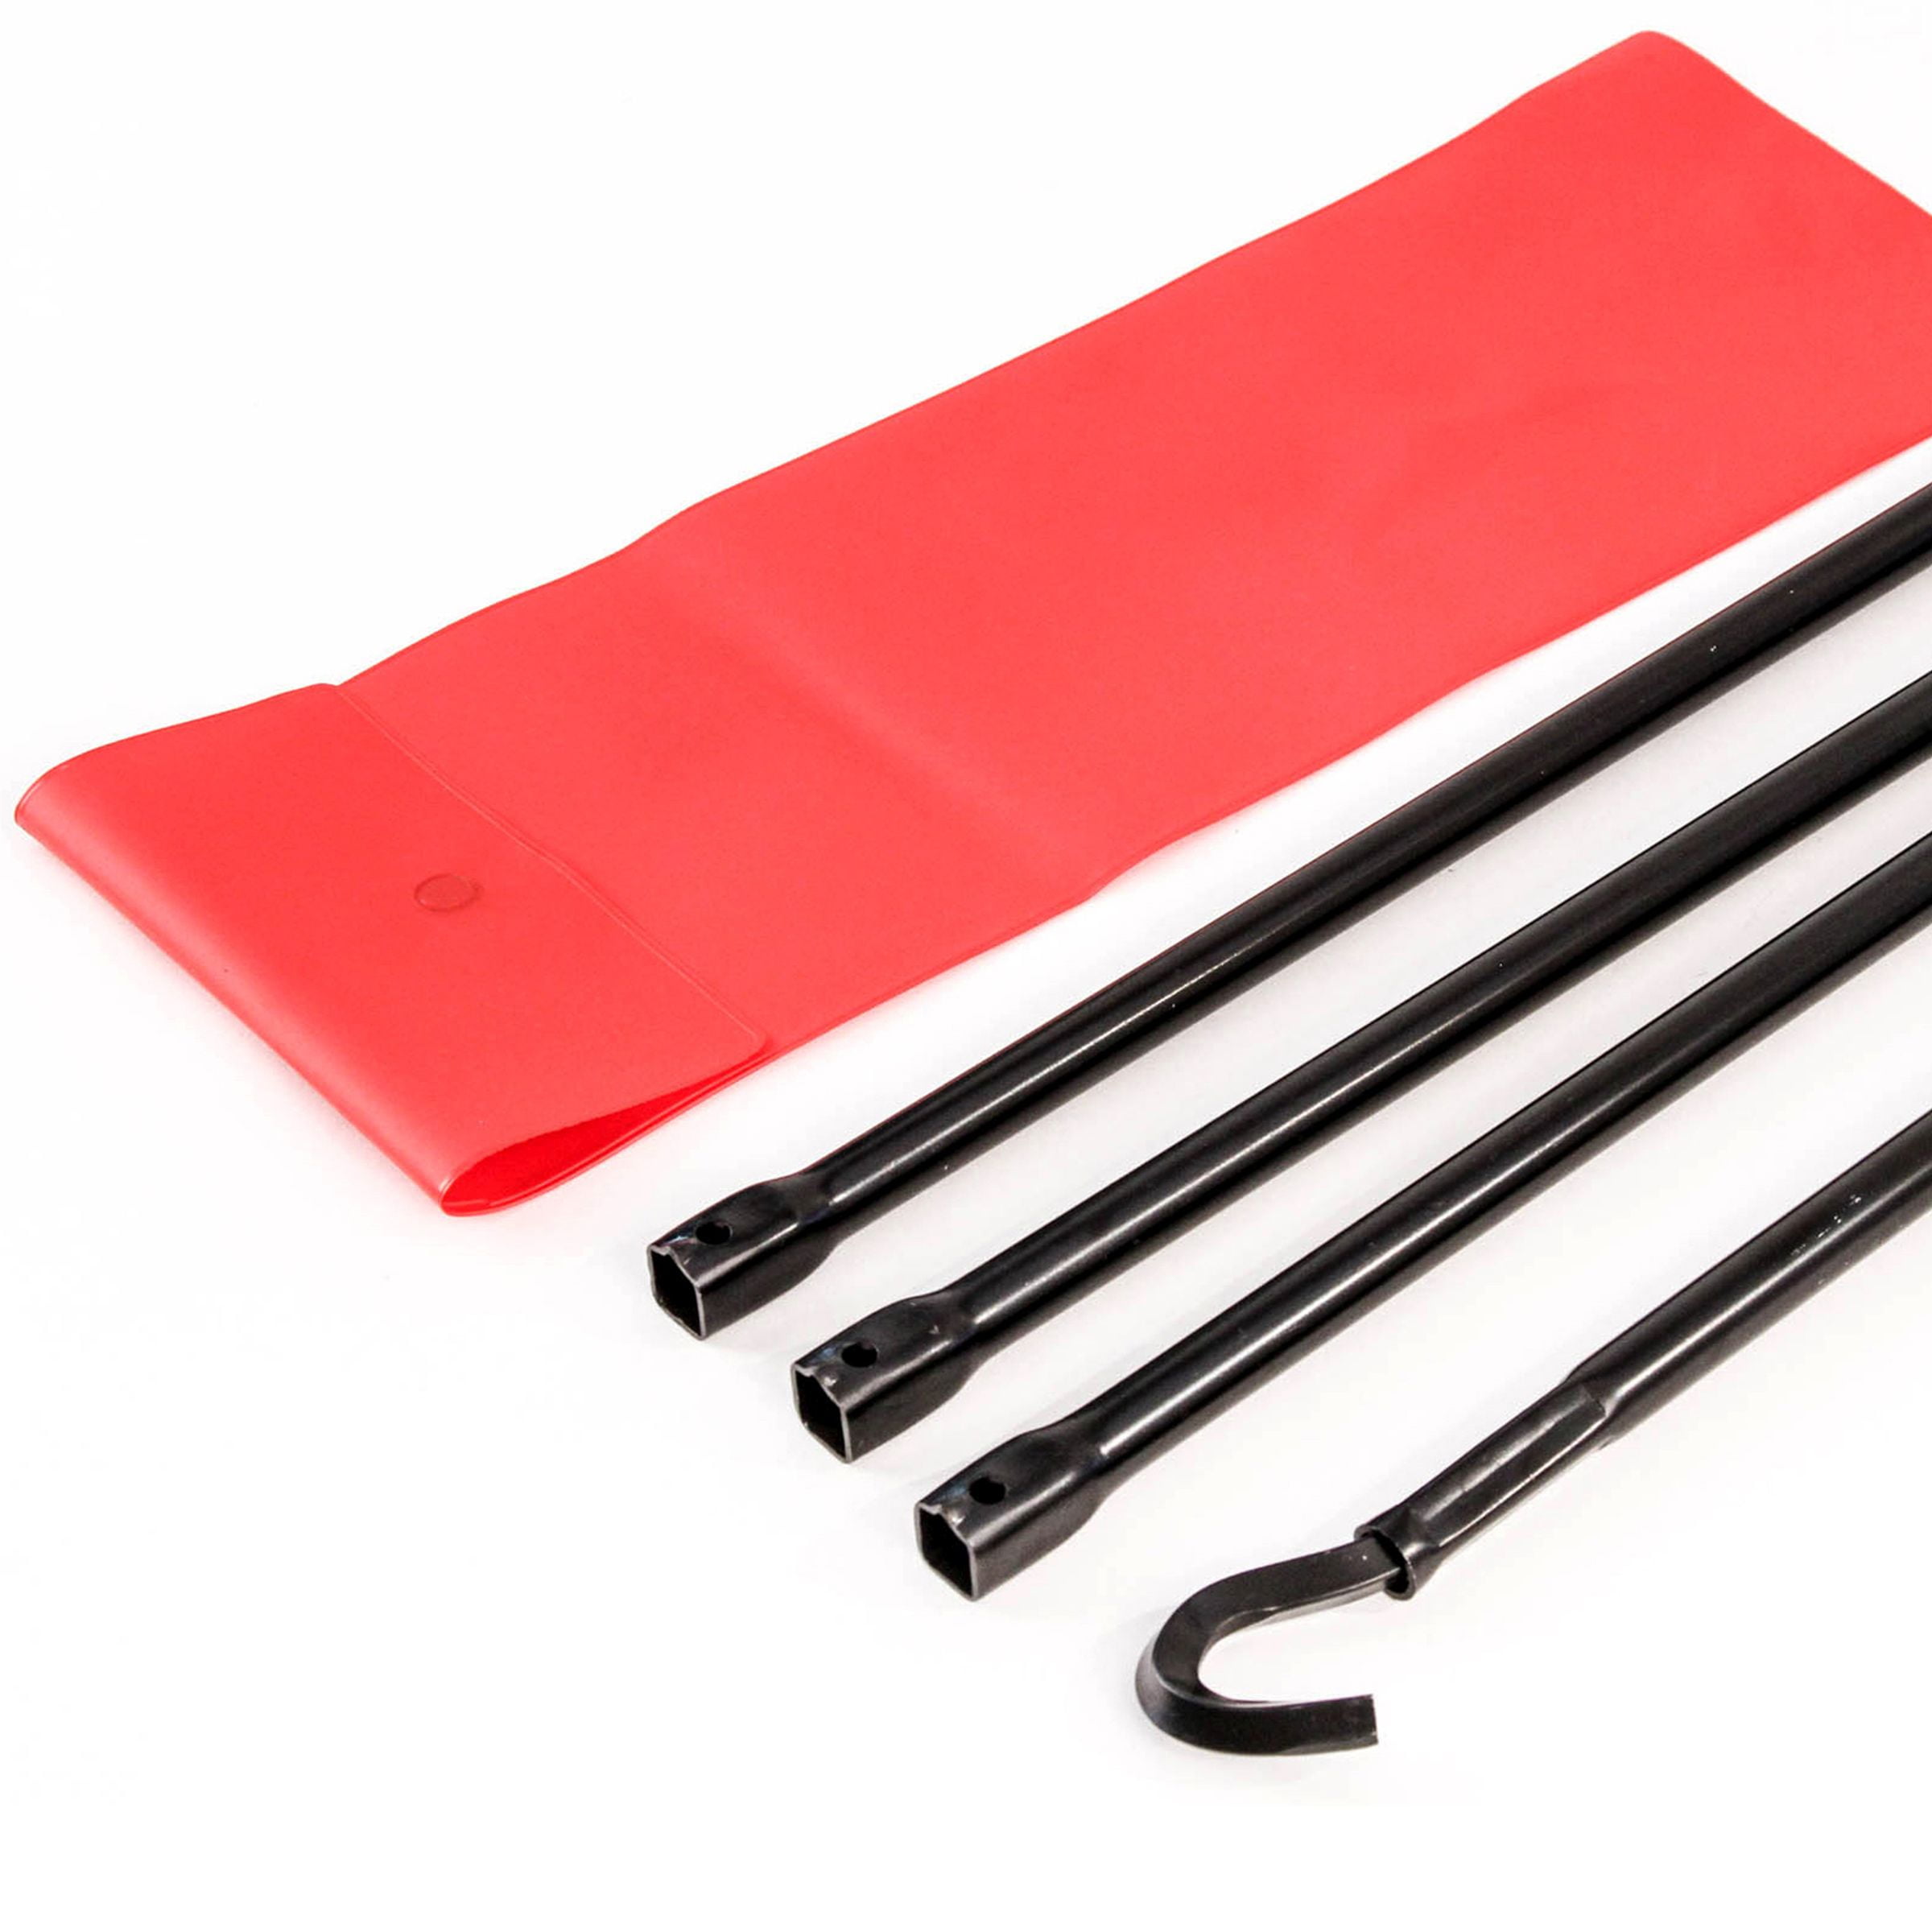 Spare Tire Lug Wrench Tools Set For Jack Replace for Dodge Ram 1500 Truck Pickup 